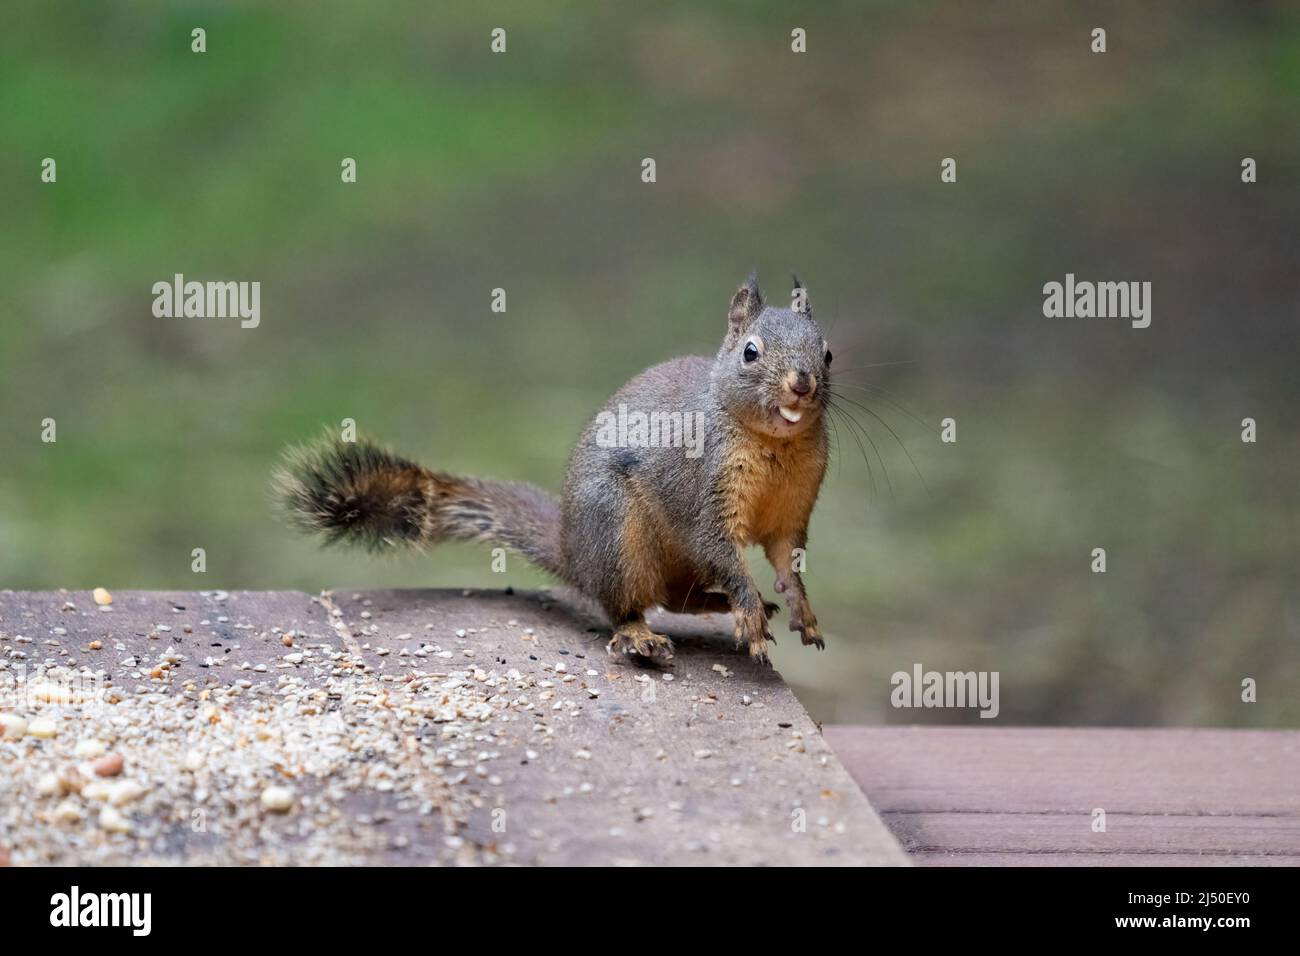 Issaquah, Washington, USA.   Funny Douglas Squirrel jumping in the air, looking startled Stock Photo